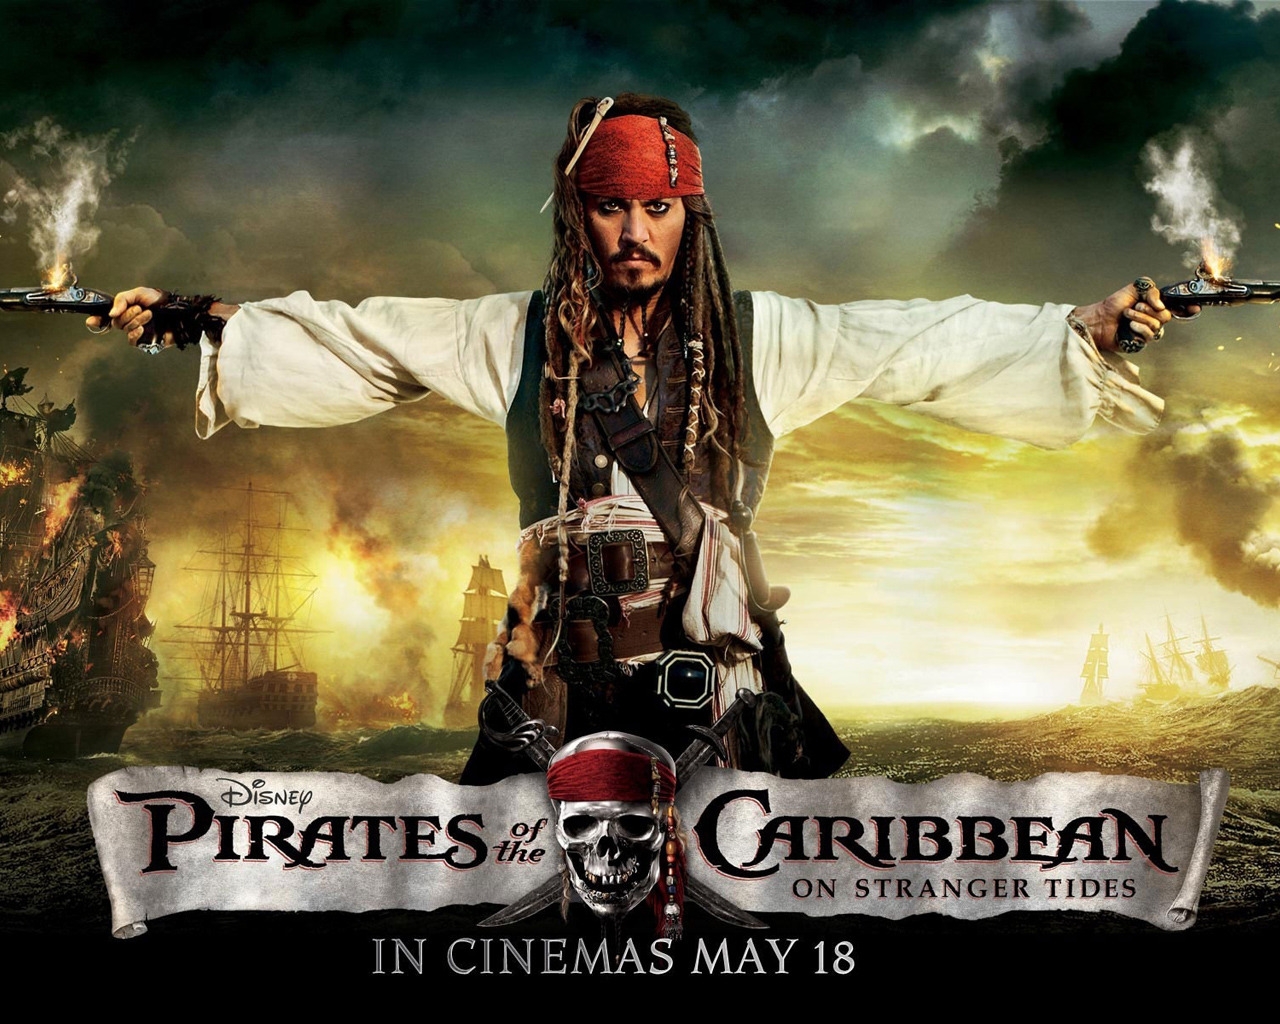 Pirates of the Caribbean 4 Poster for 1280 x 1024 resolution